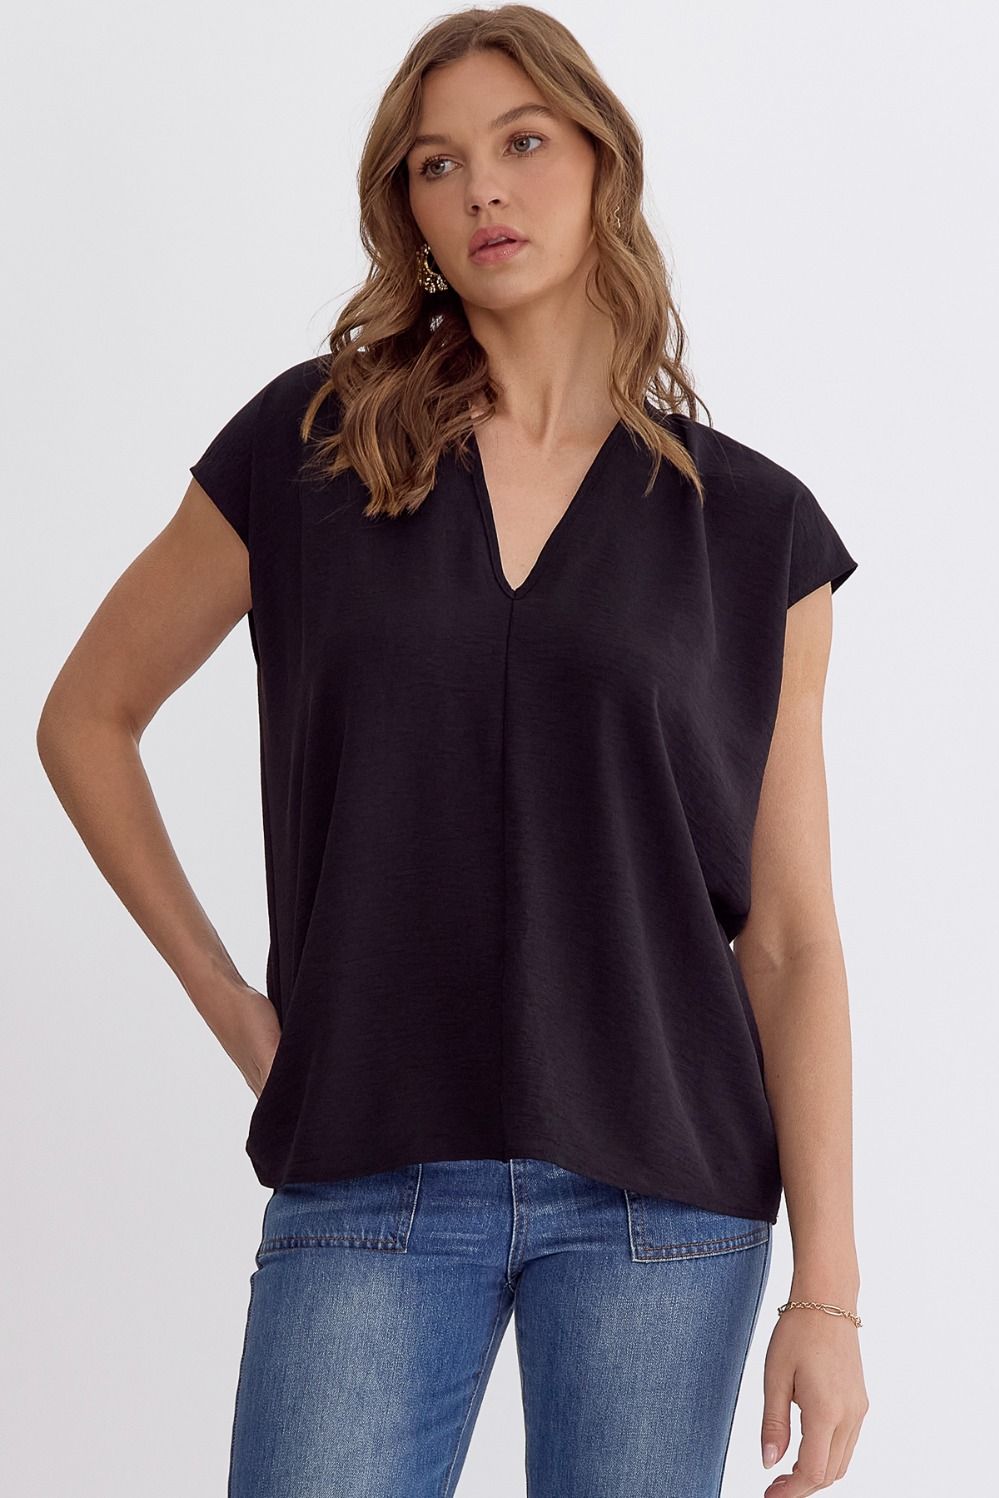 Entro | Black V-Neck Relaxed Fit Top | Sweetest Stitch Boutique